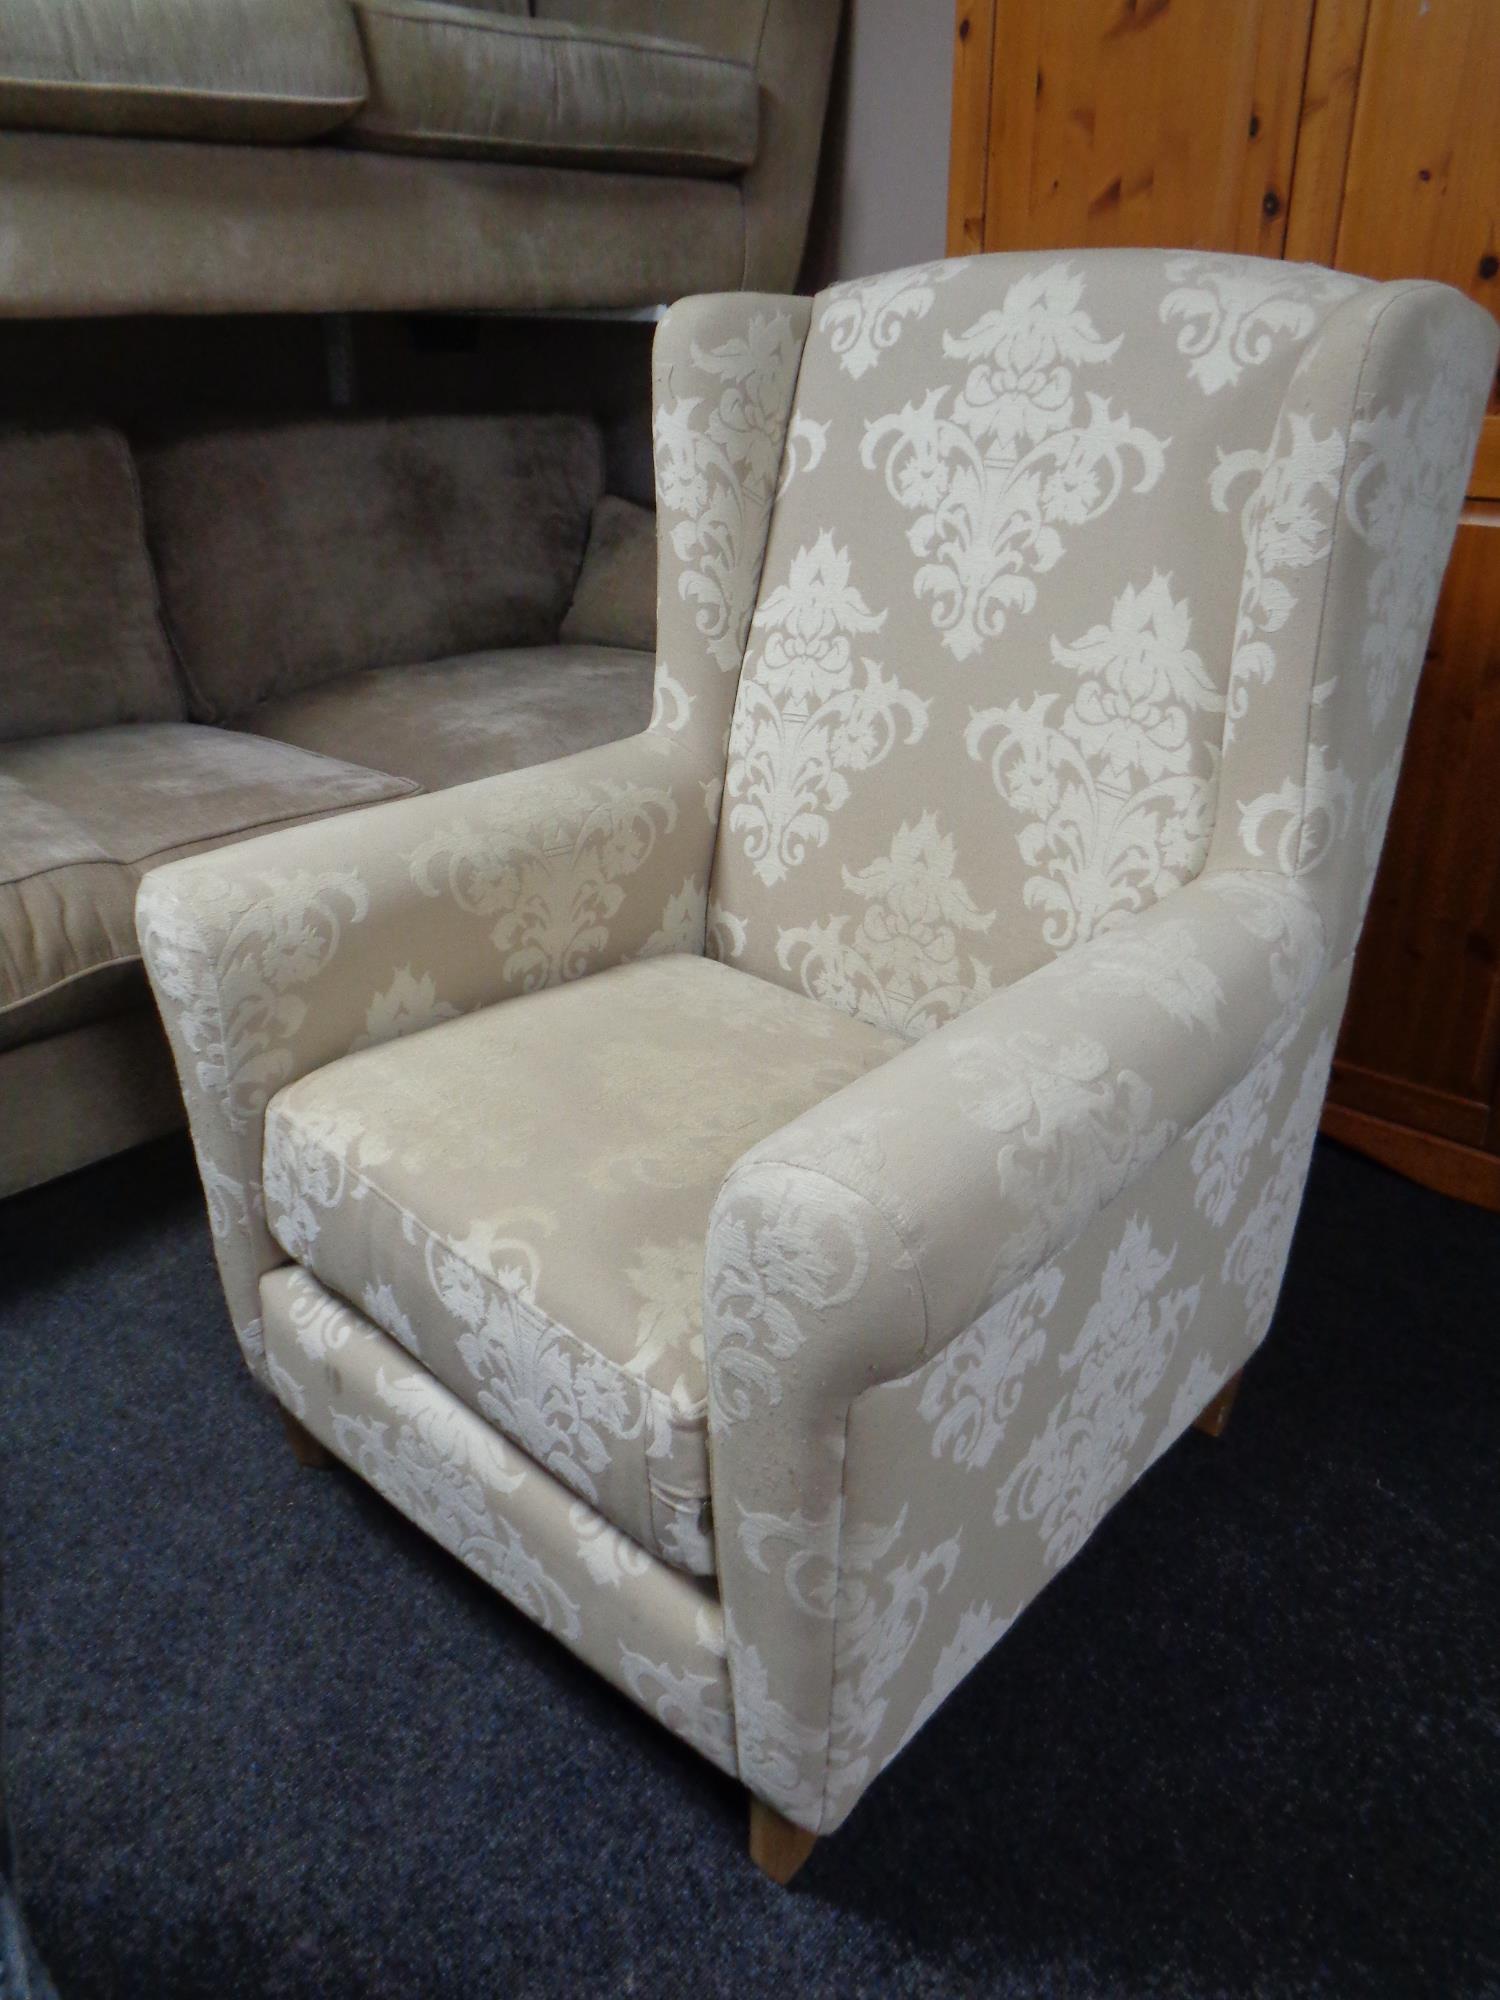 A contemporary high backed wingback armchair upholstered in a cream and beige fabric